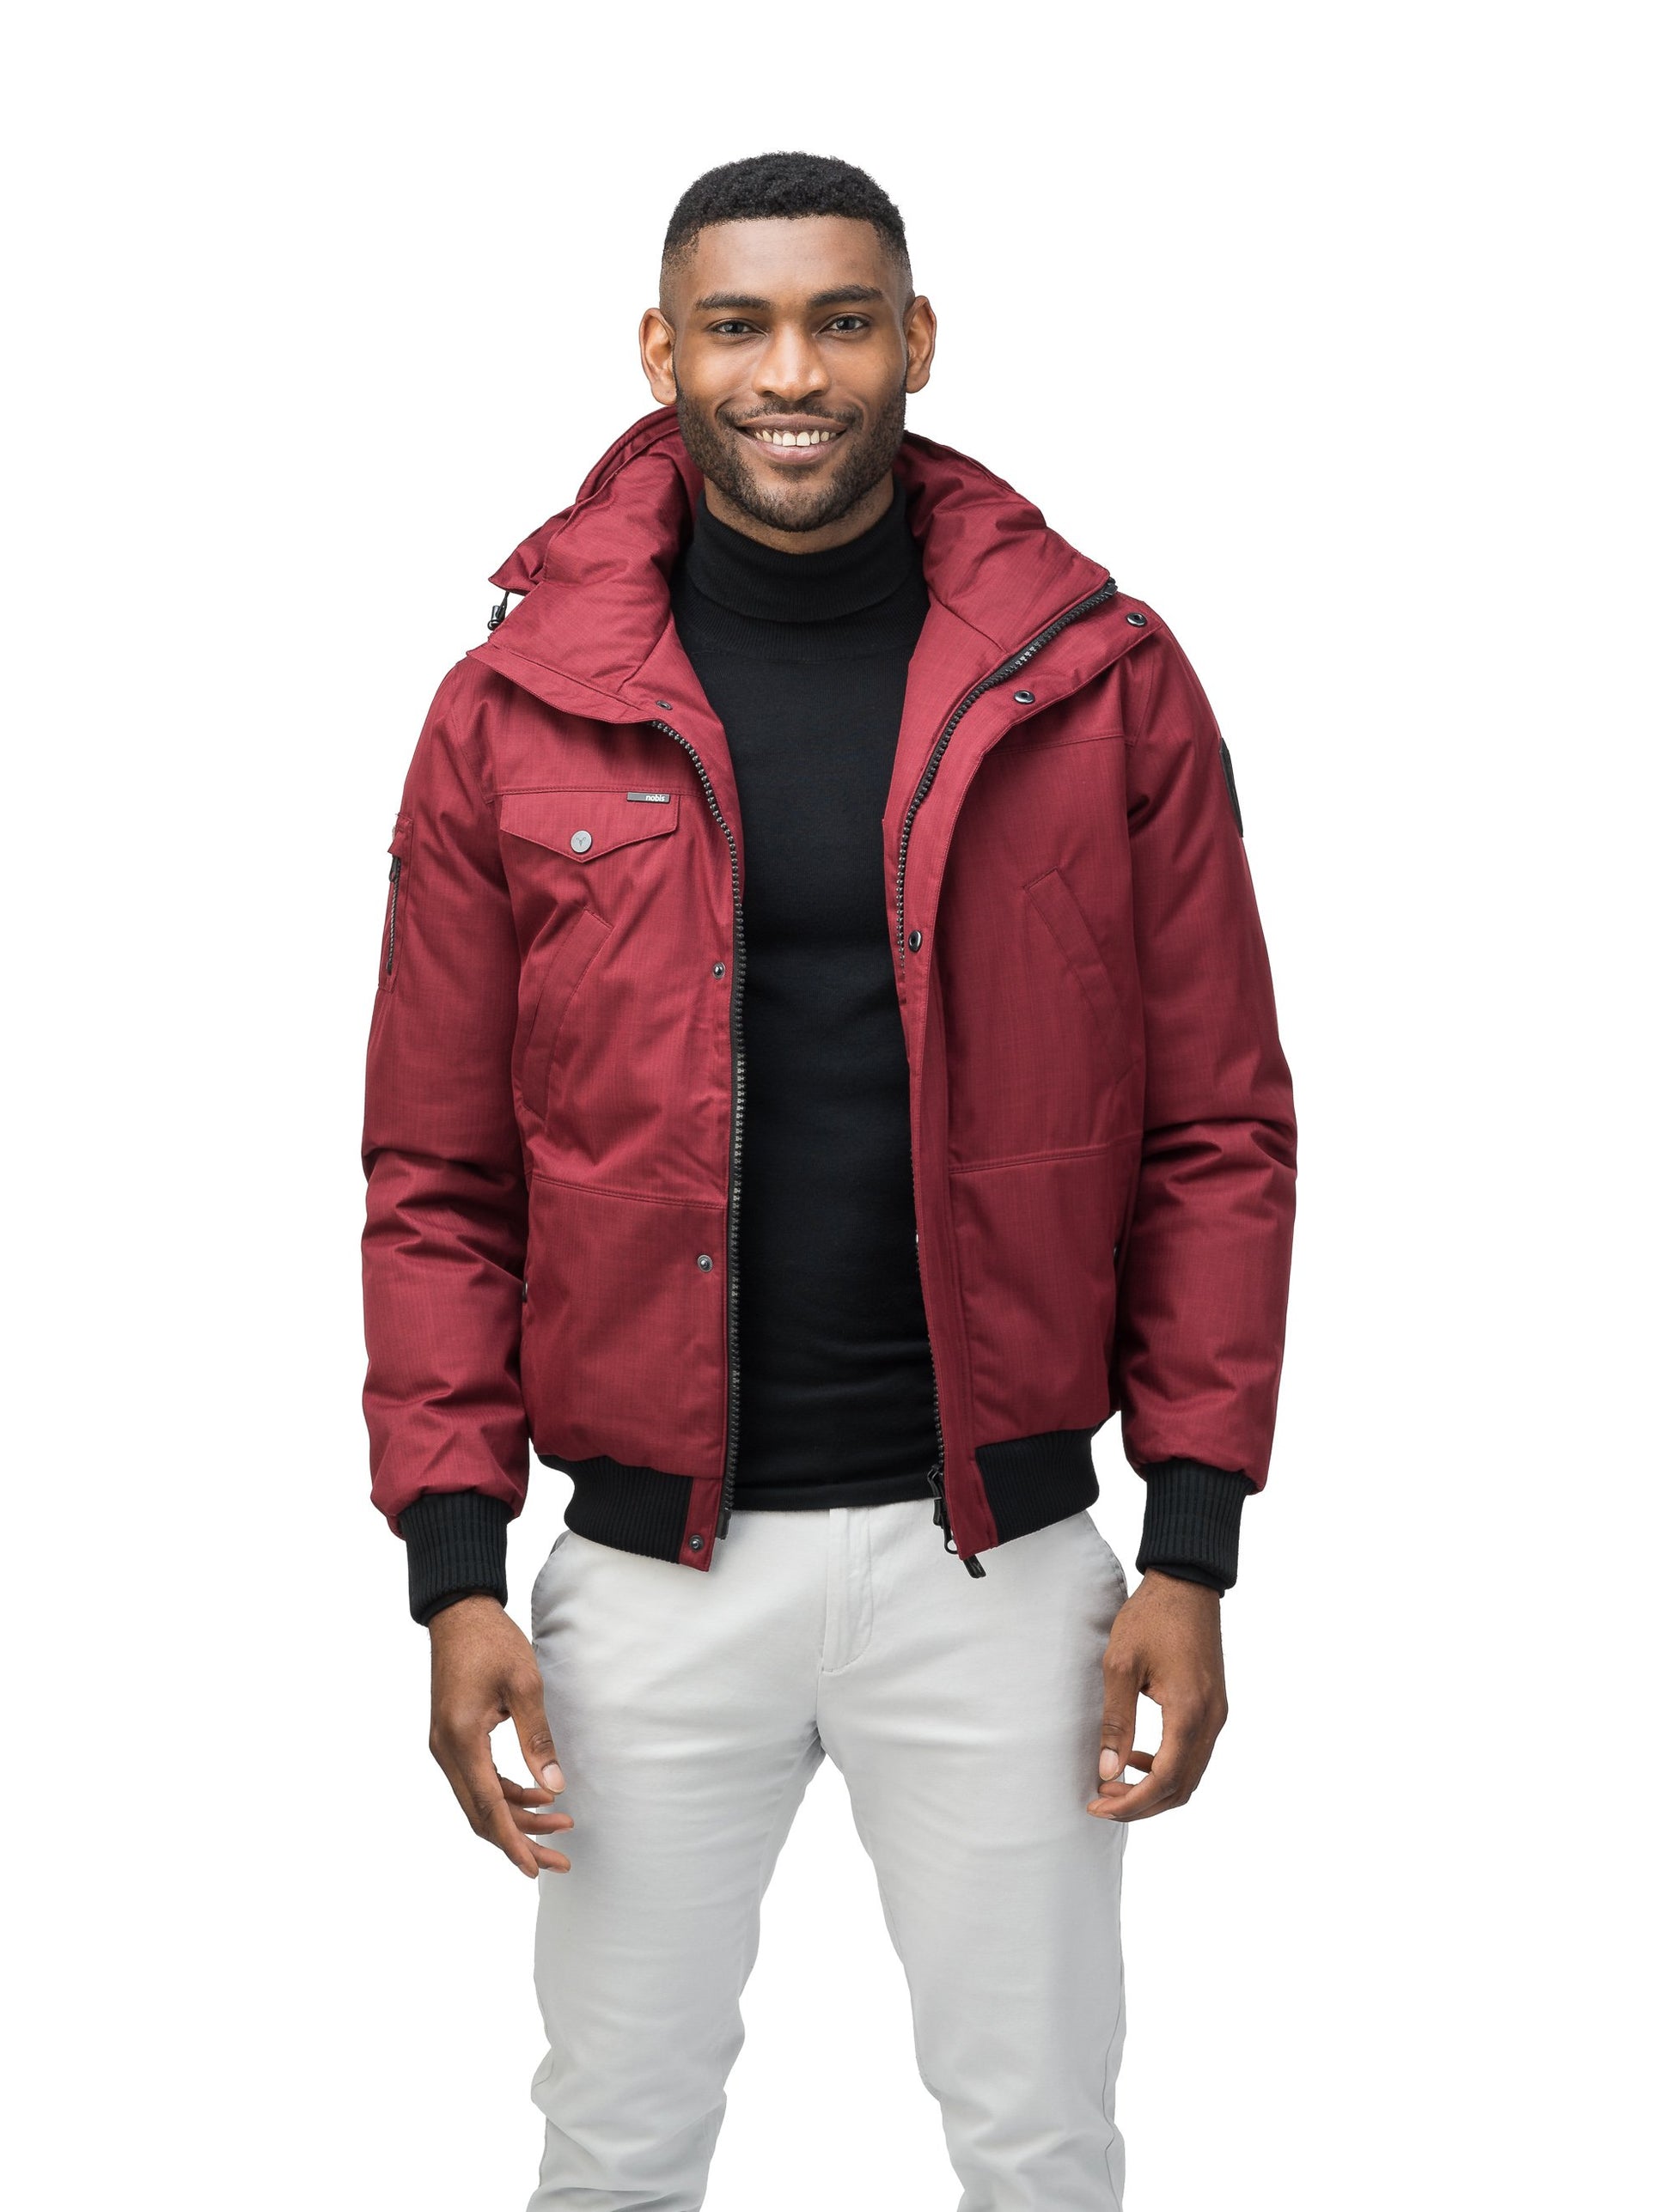 Men's sleek down filled bomber jacket with clean details and a fur free hood in CH Cabernet